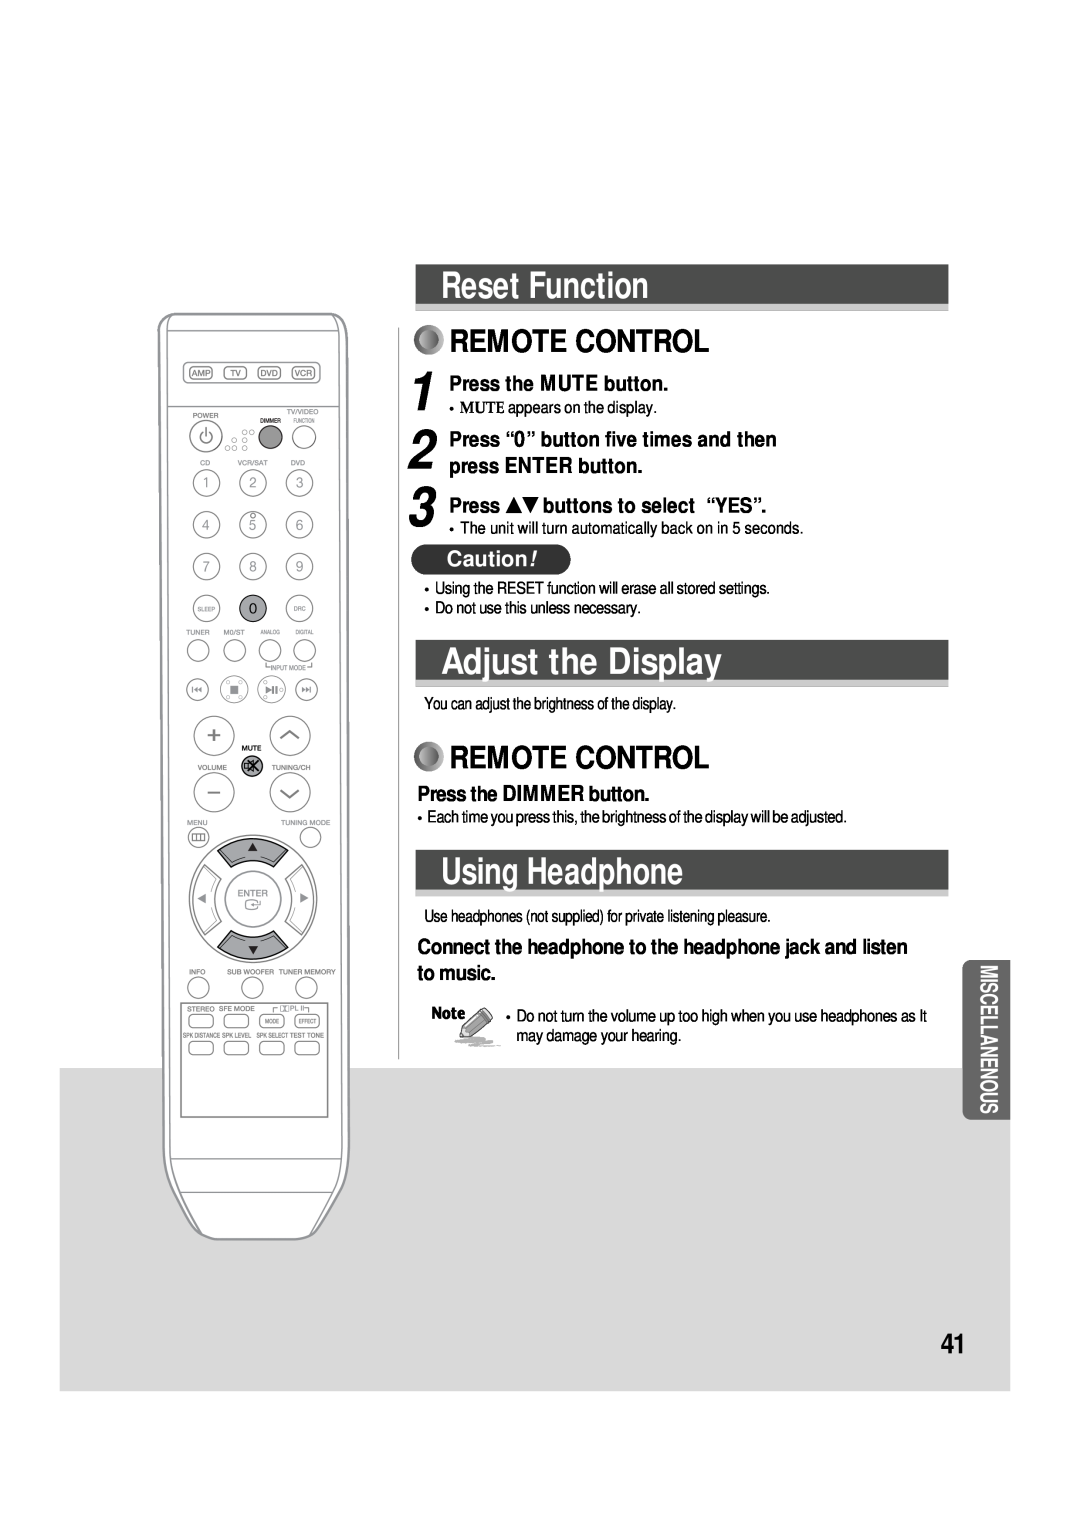 Samsung 20060510083254531 manual Reset Function, Adjust the Display, Using Headphone, Remote Control, Press the MUTE button 